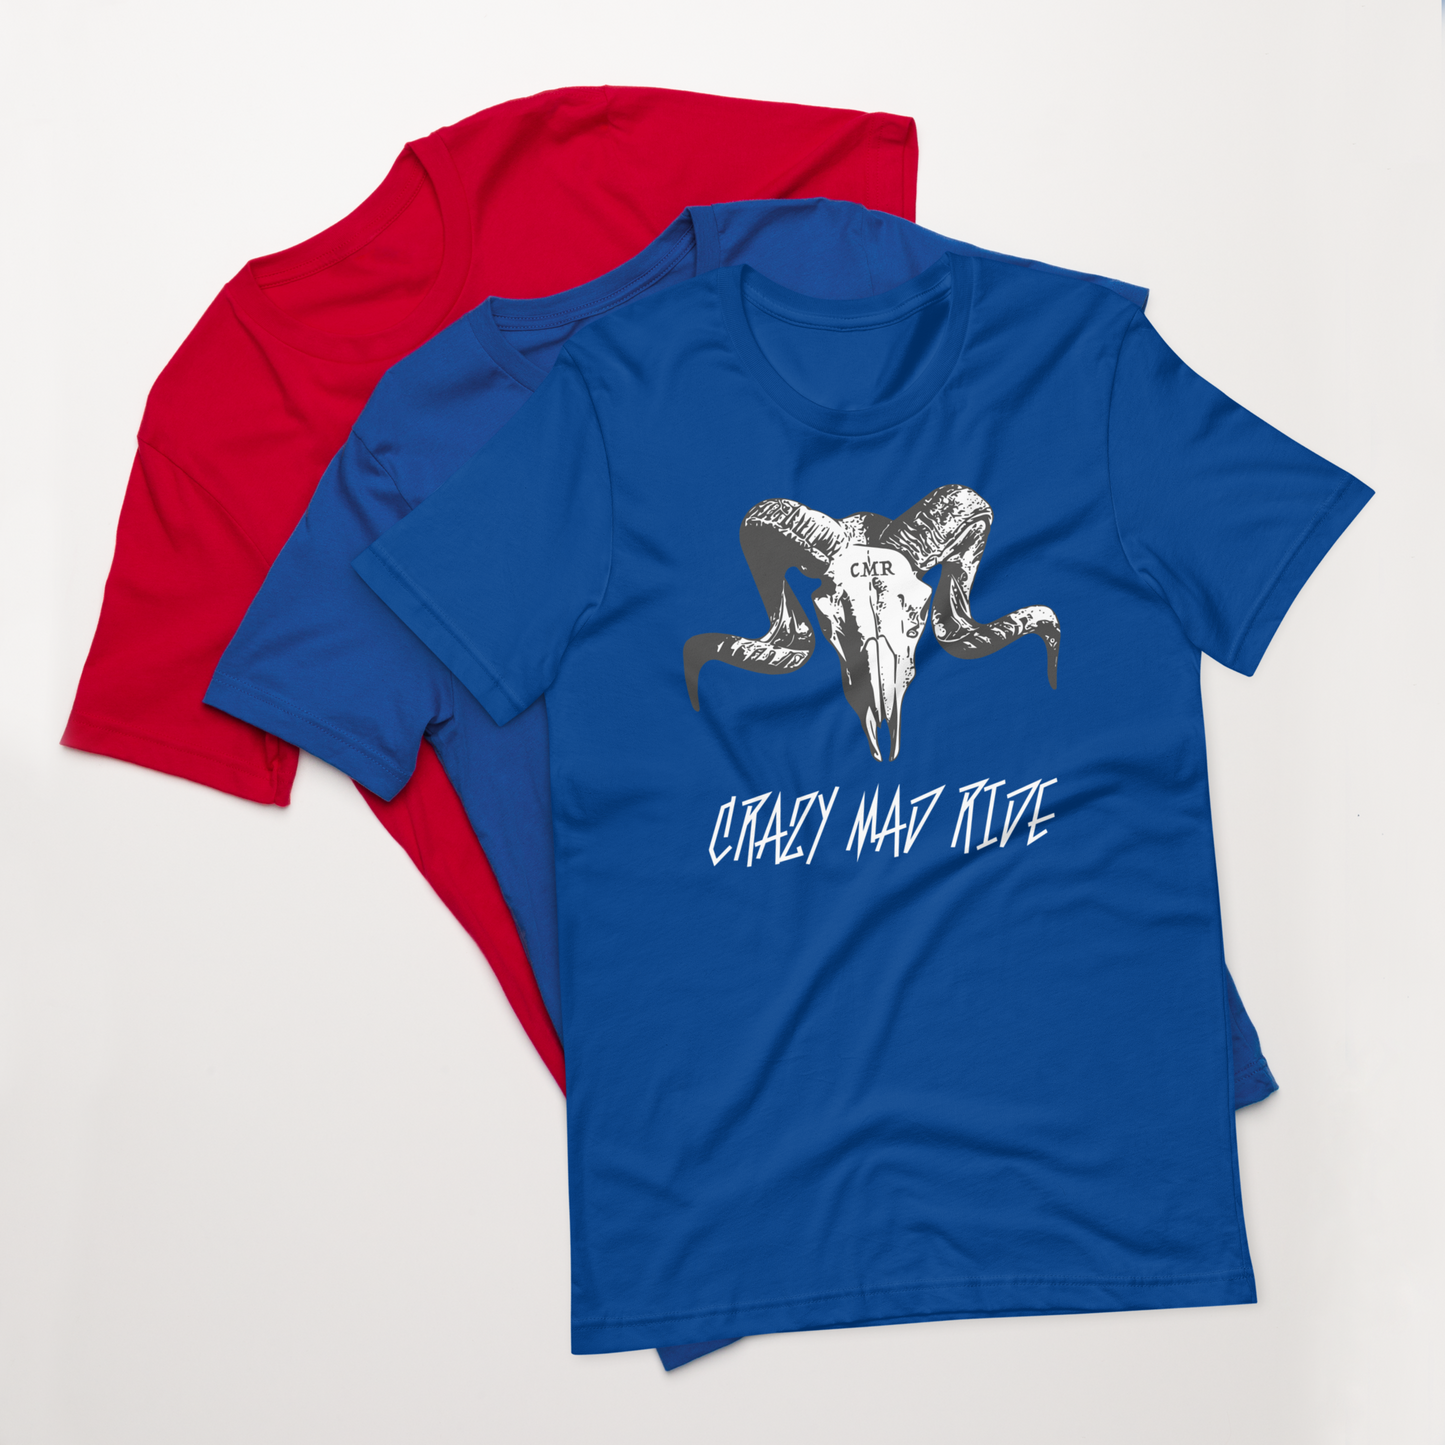 Crazy Mad Ride Lightweight T-Shirt (Color Choices)